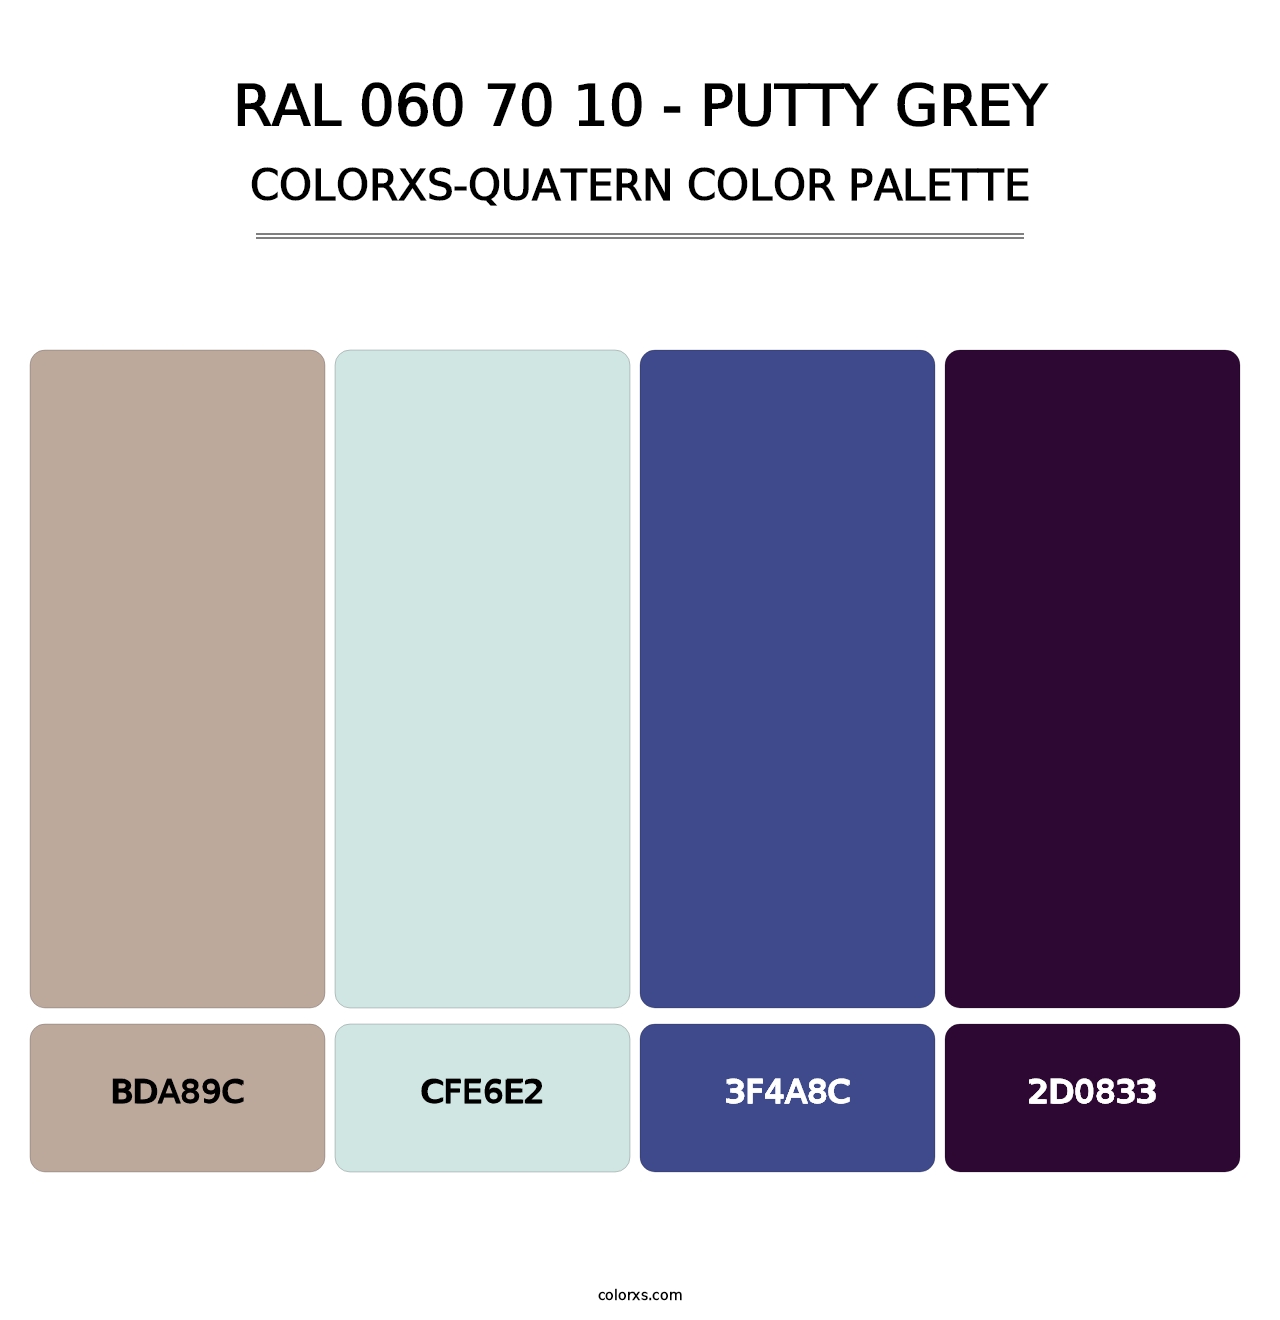 RAL 060 70 10 - Putty Grey - Colorxs Quatern Palette